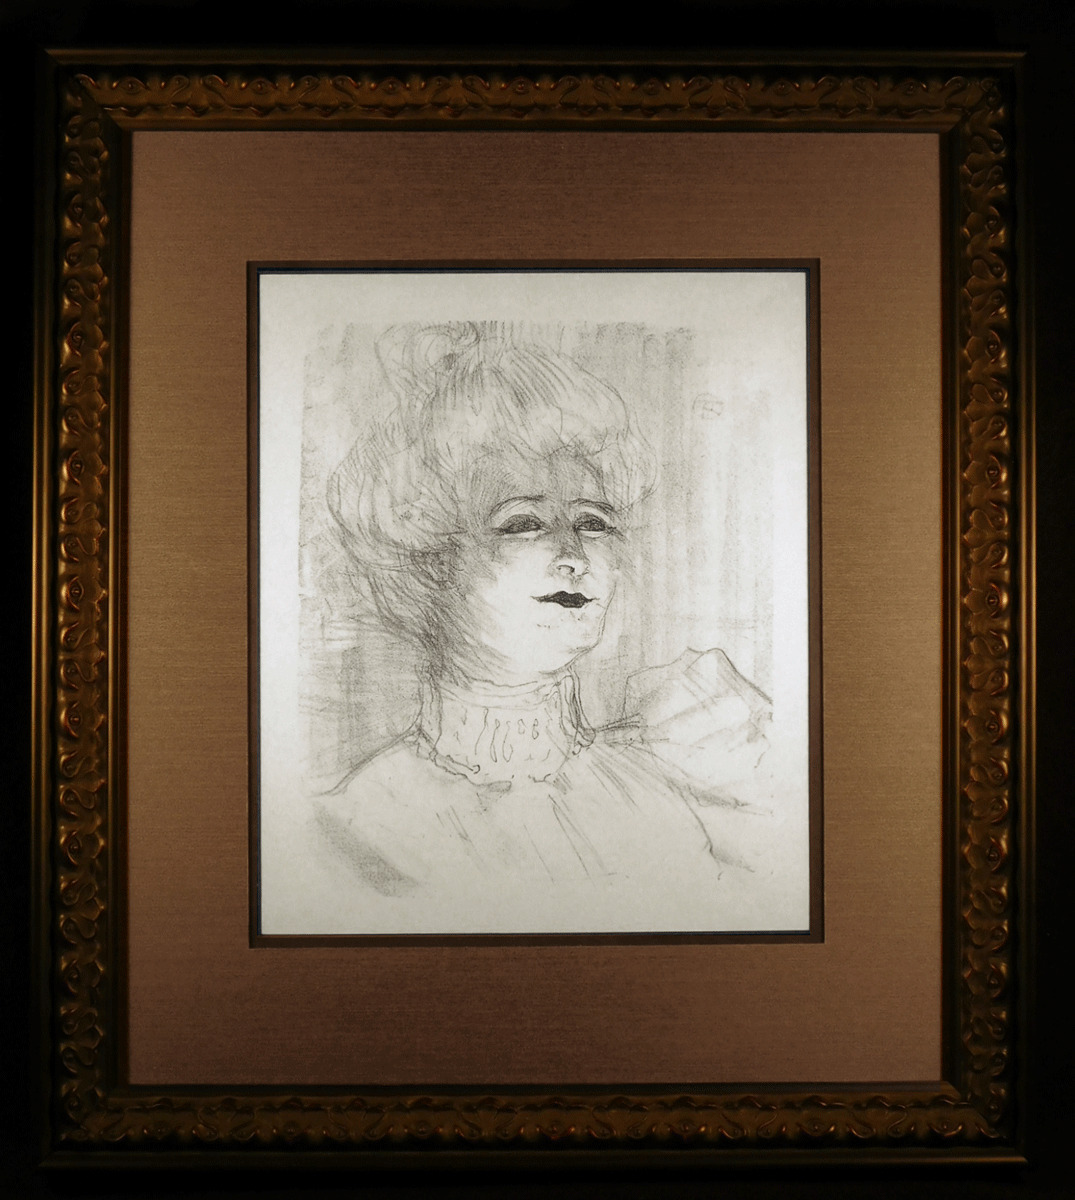 Marie-Louise Marsy Orig 1898 Lithograph by Toulouse-Lautrec Framed Wittrock 260